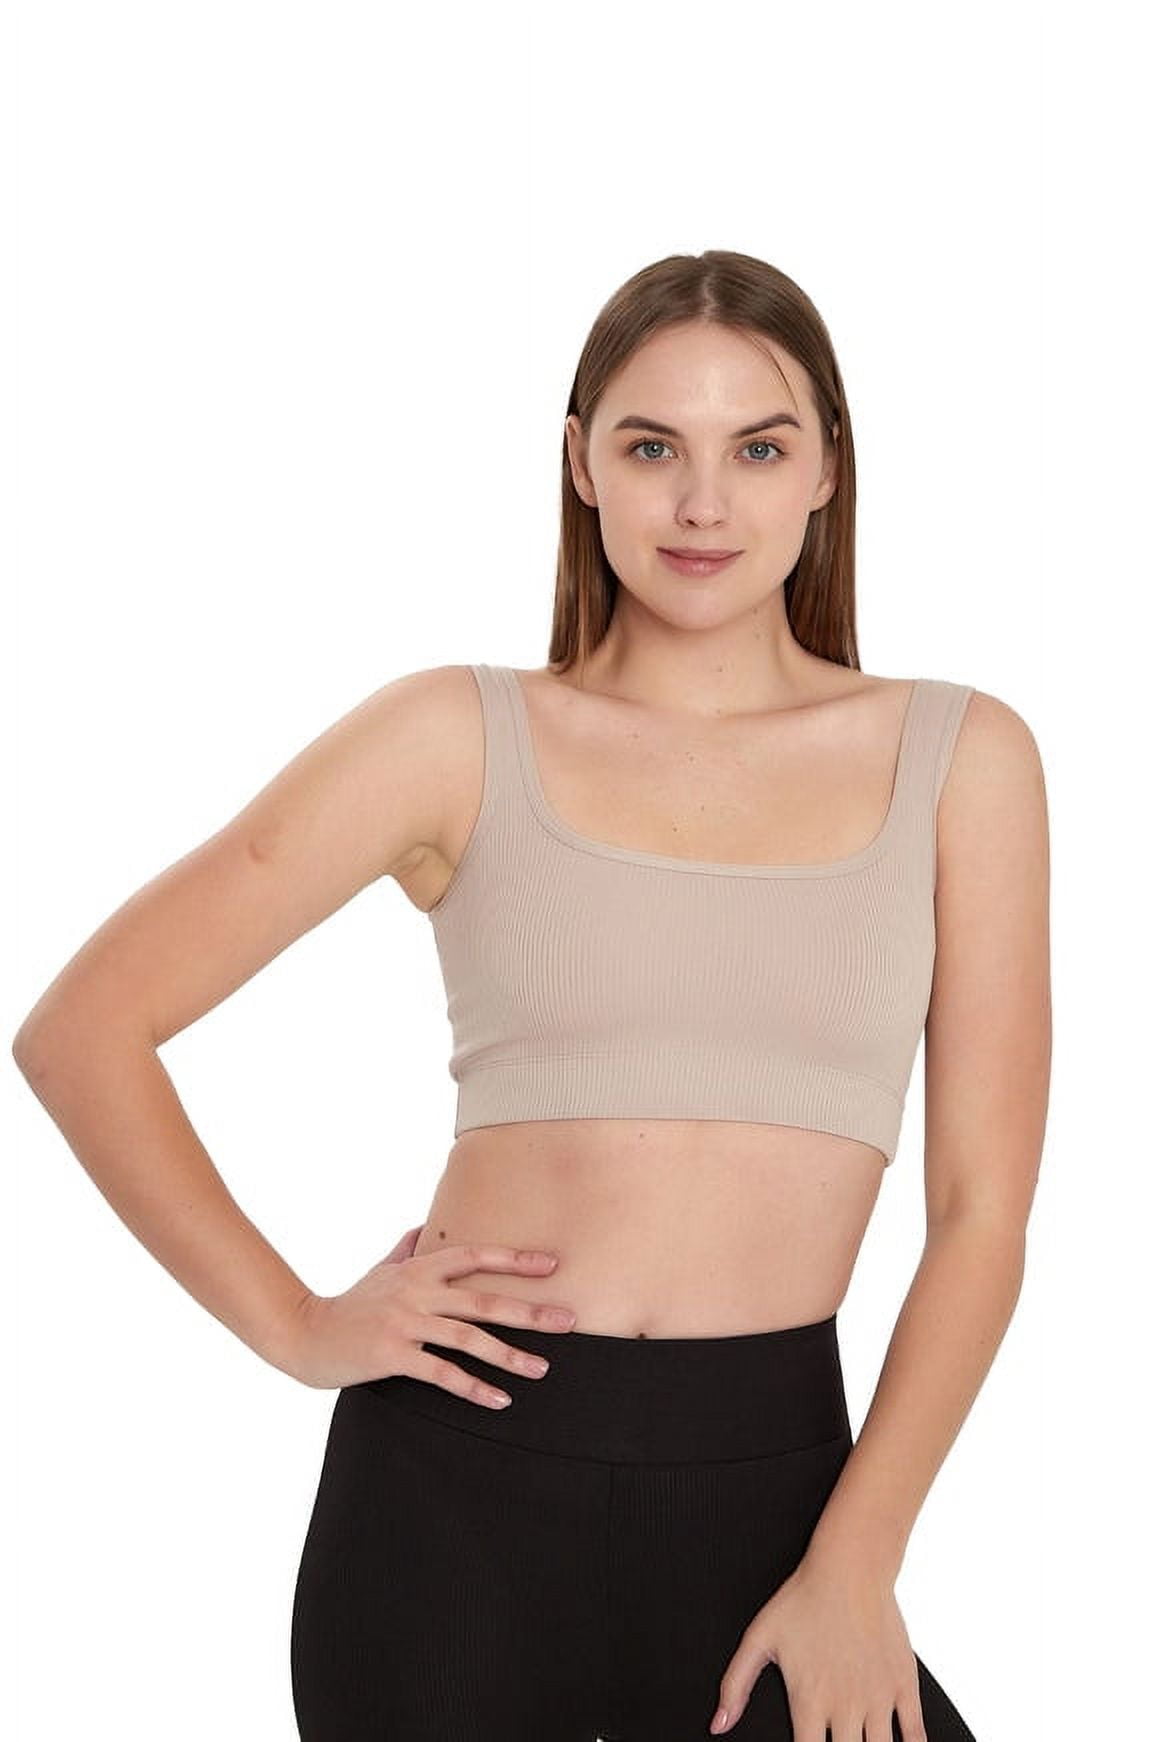 Freya Active Sonic Underwire Moulded Spacer Sports Bra AA4892